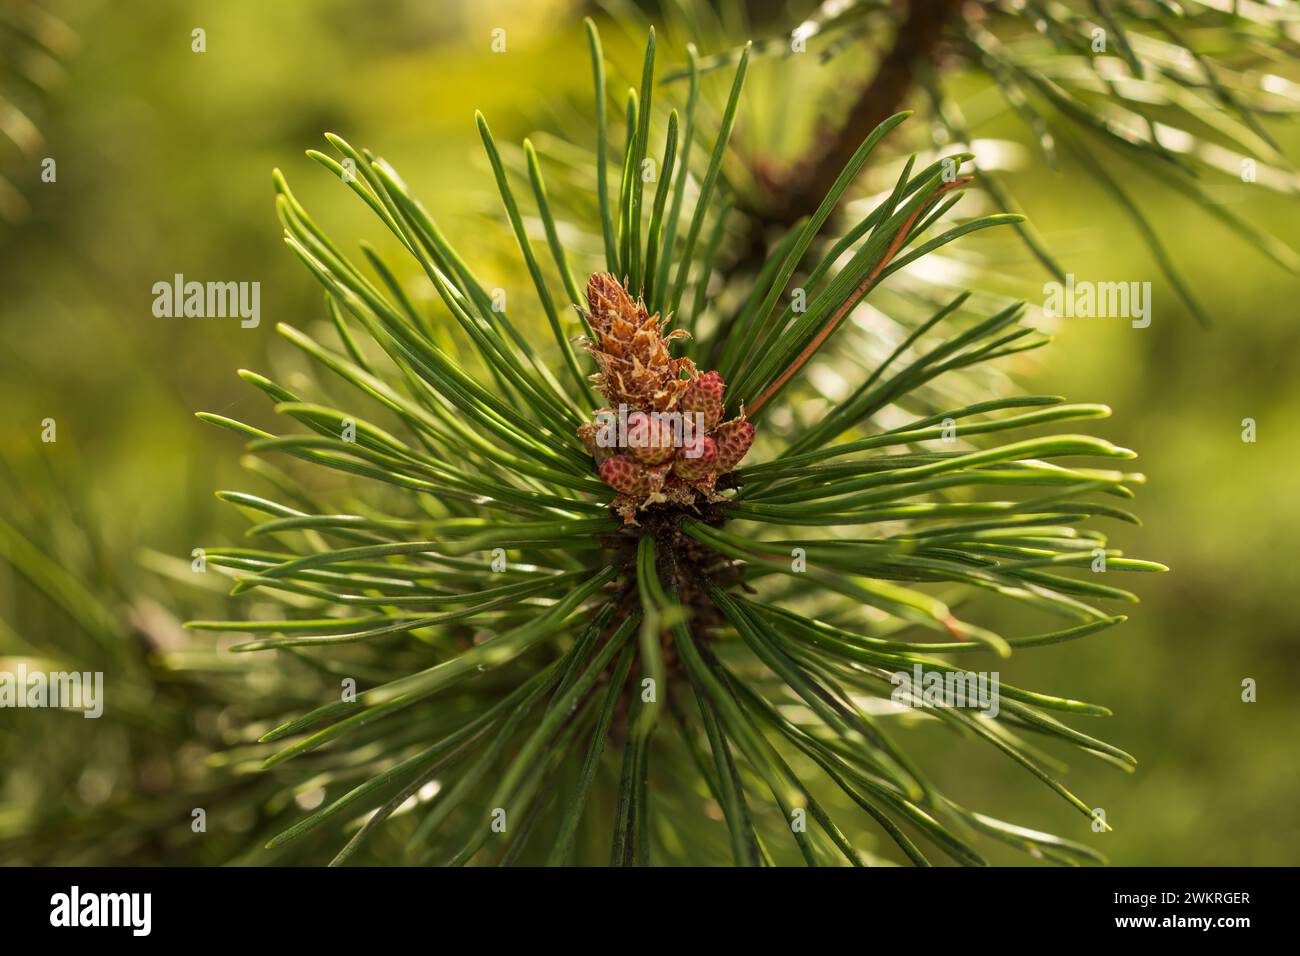 young fresh pine cones in spring. pine needles, blurred background, close-up. Stock Photo